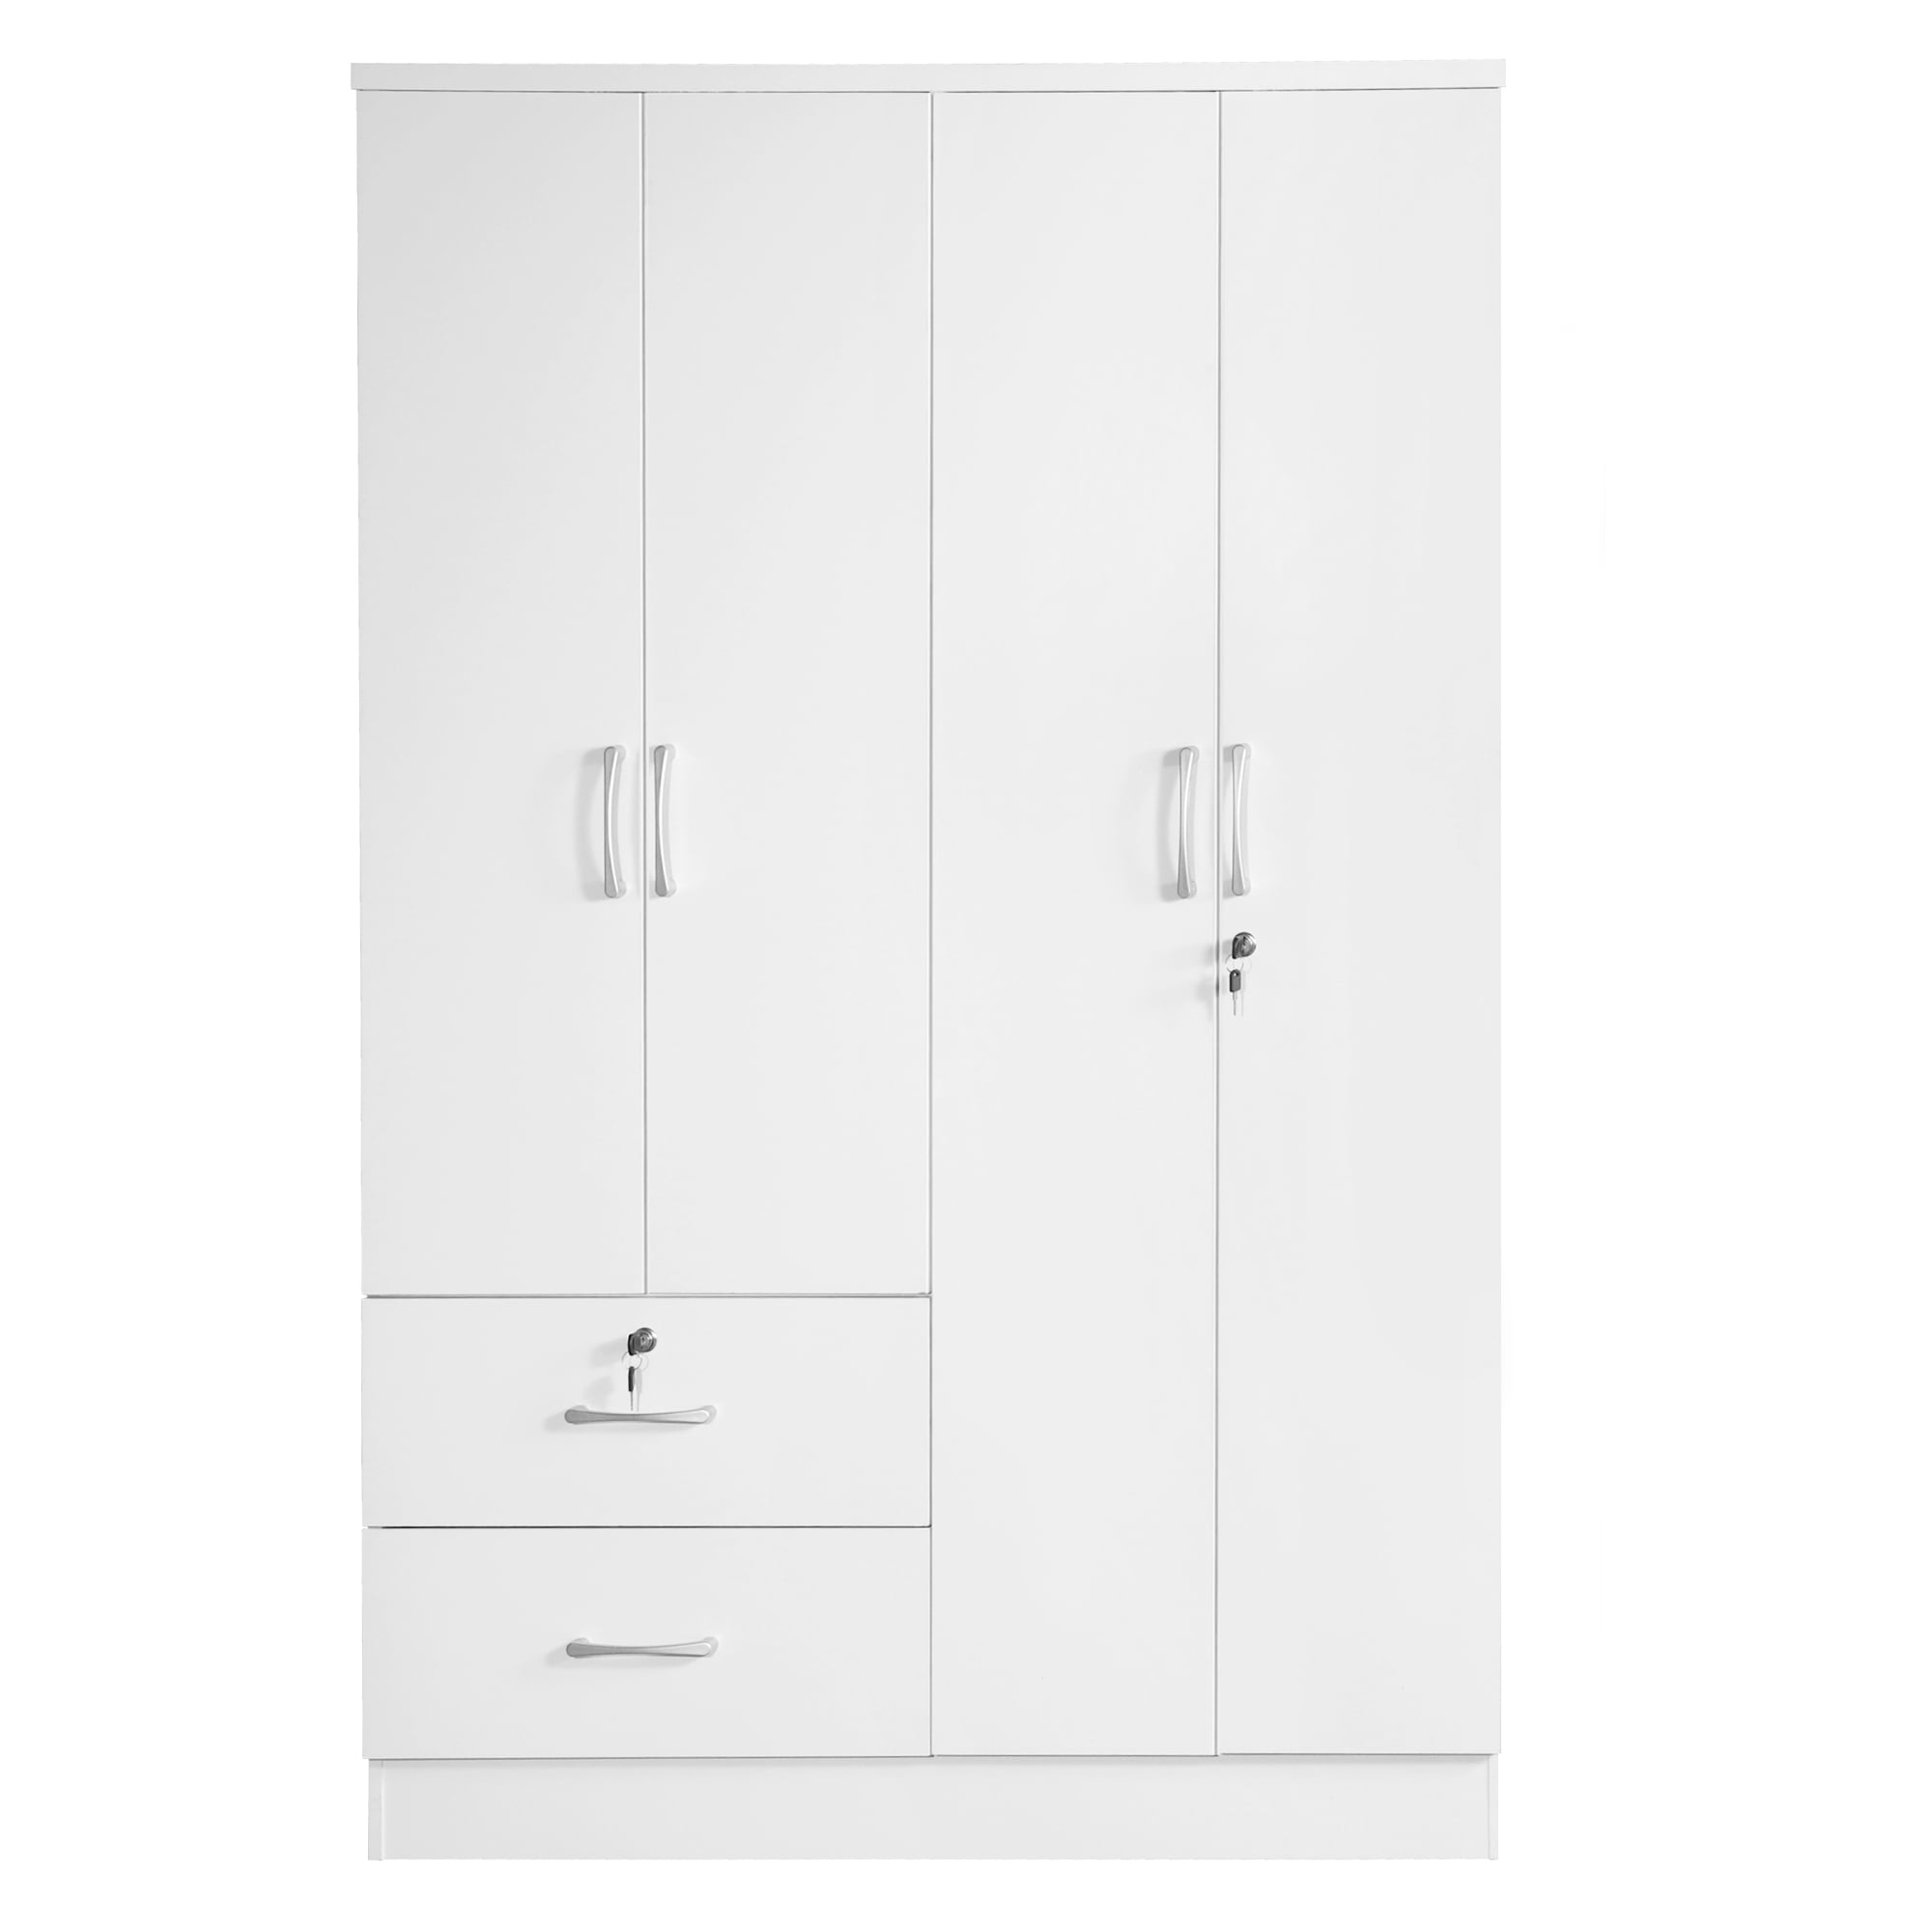 Better Home Products Luna Modern Wood 4 Doors 2 Drawers Armoire in White